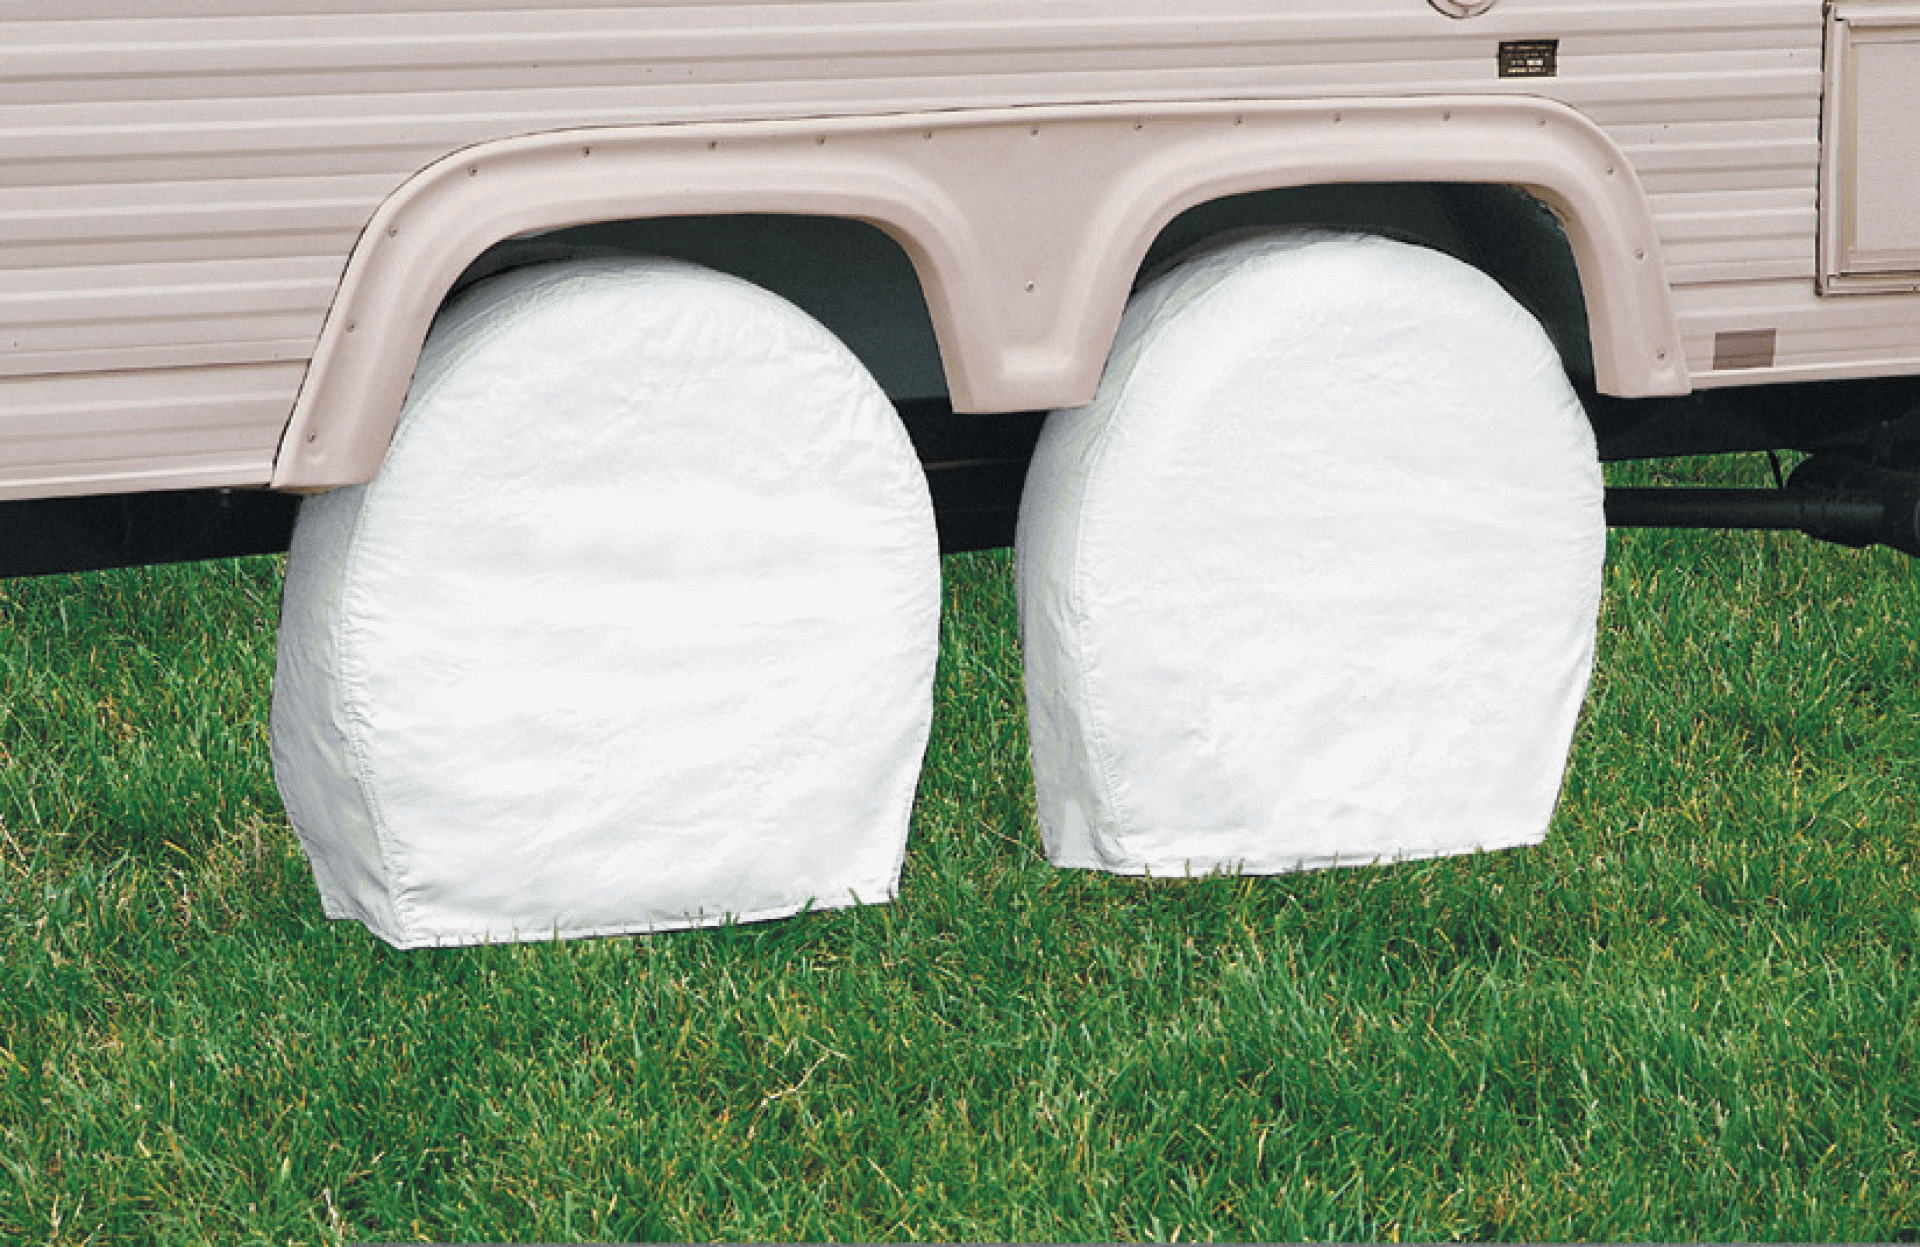 CLASSIC ACCESSORIES | 76230 | RV WHEEL COVER - WHEEL DIAMETER: 24" TO 26.5" TIRE WIDTH 8.25" SNOW WHITE 2 PACK